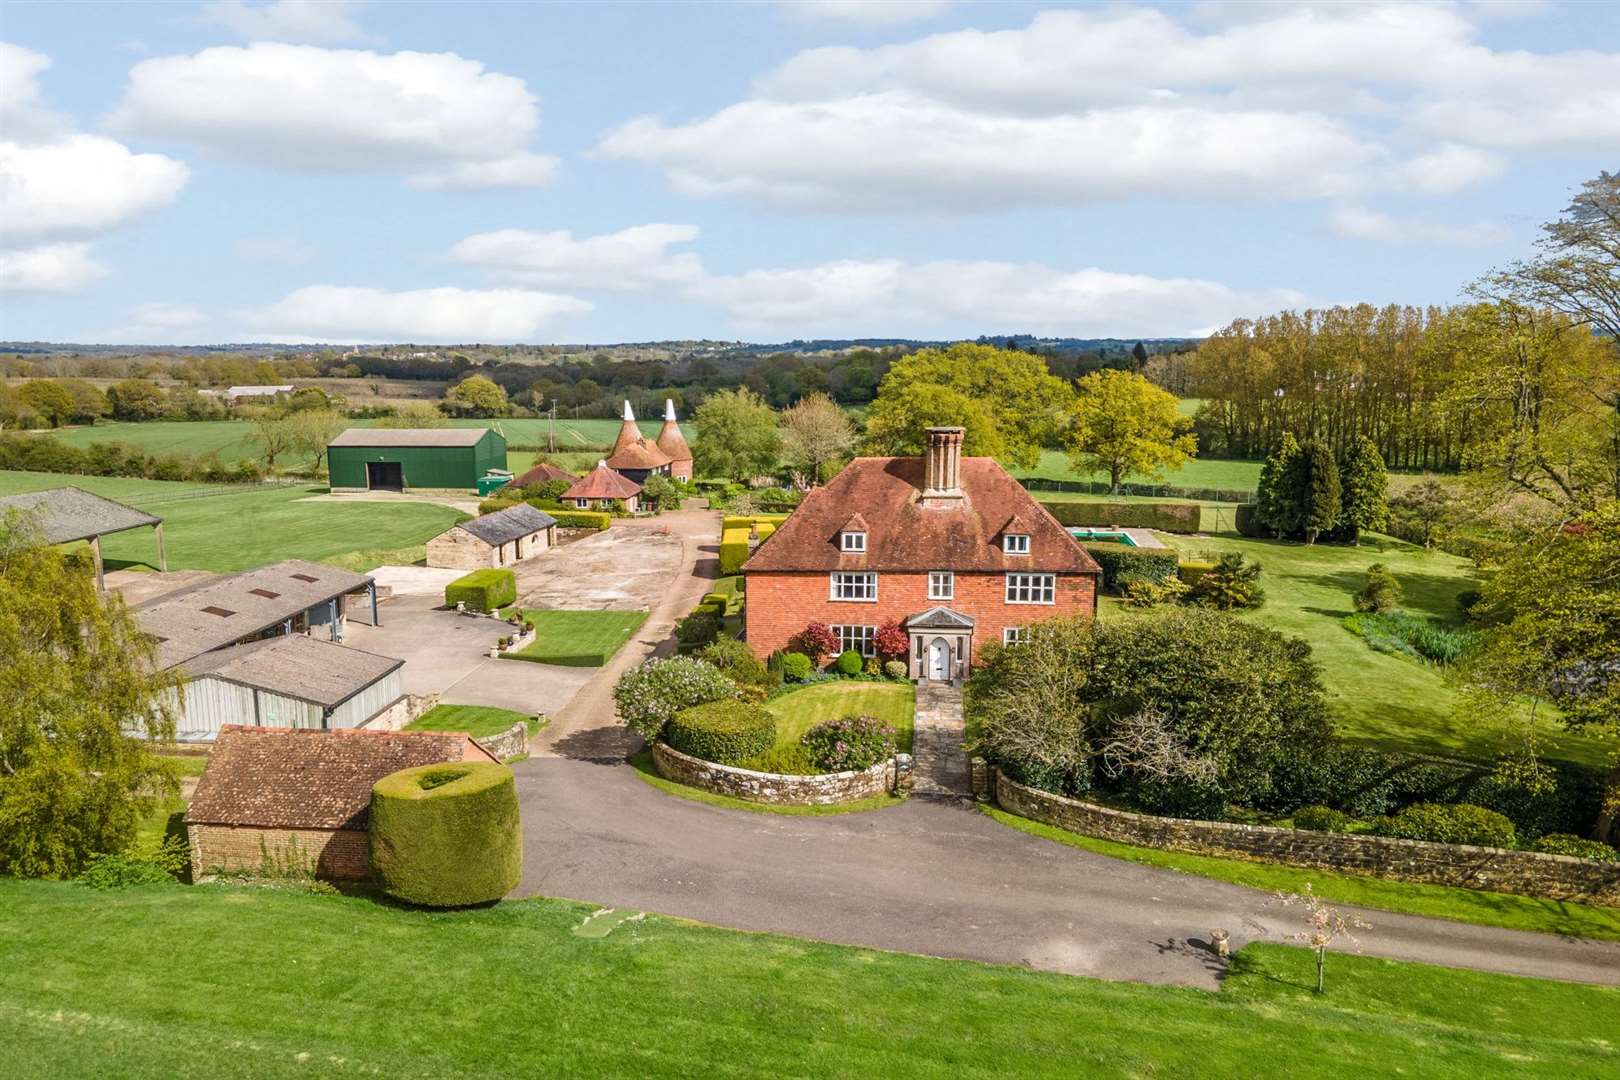 Delmonden Farm in Hawkhurst is for sale at a tad under £4m